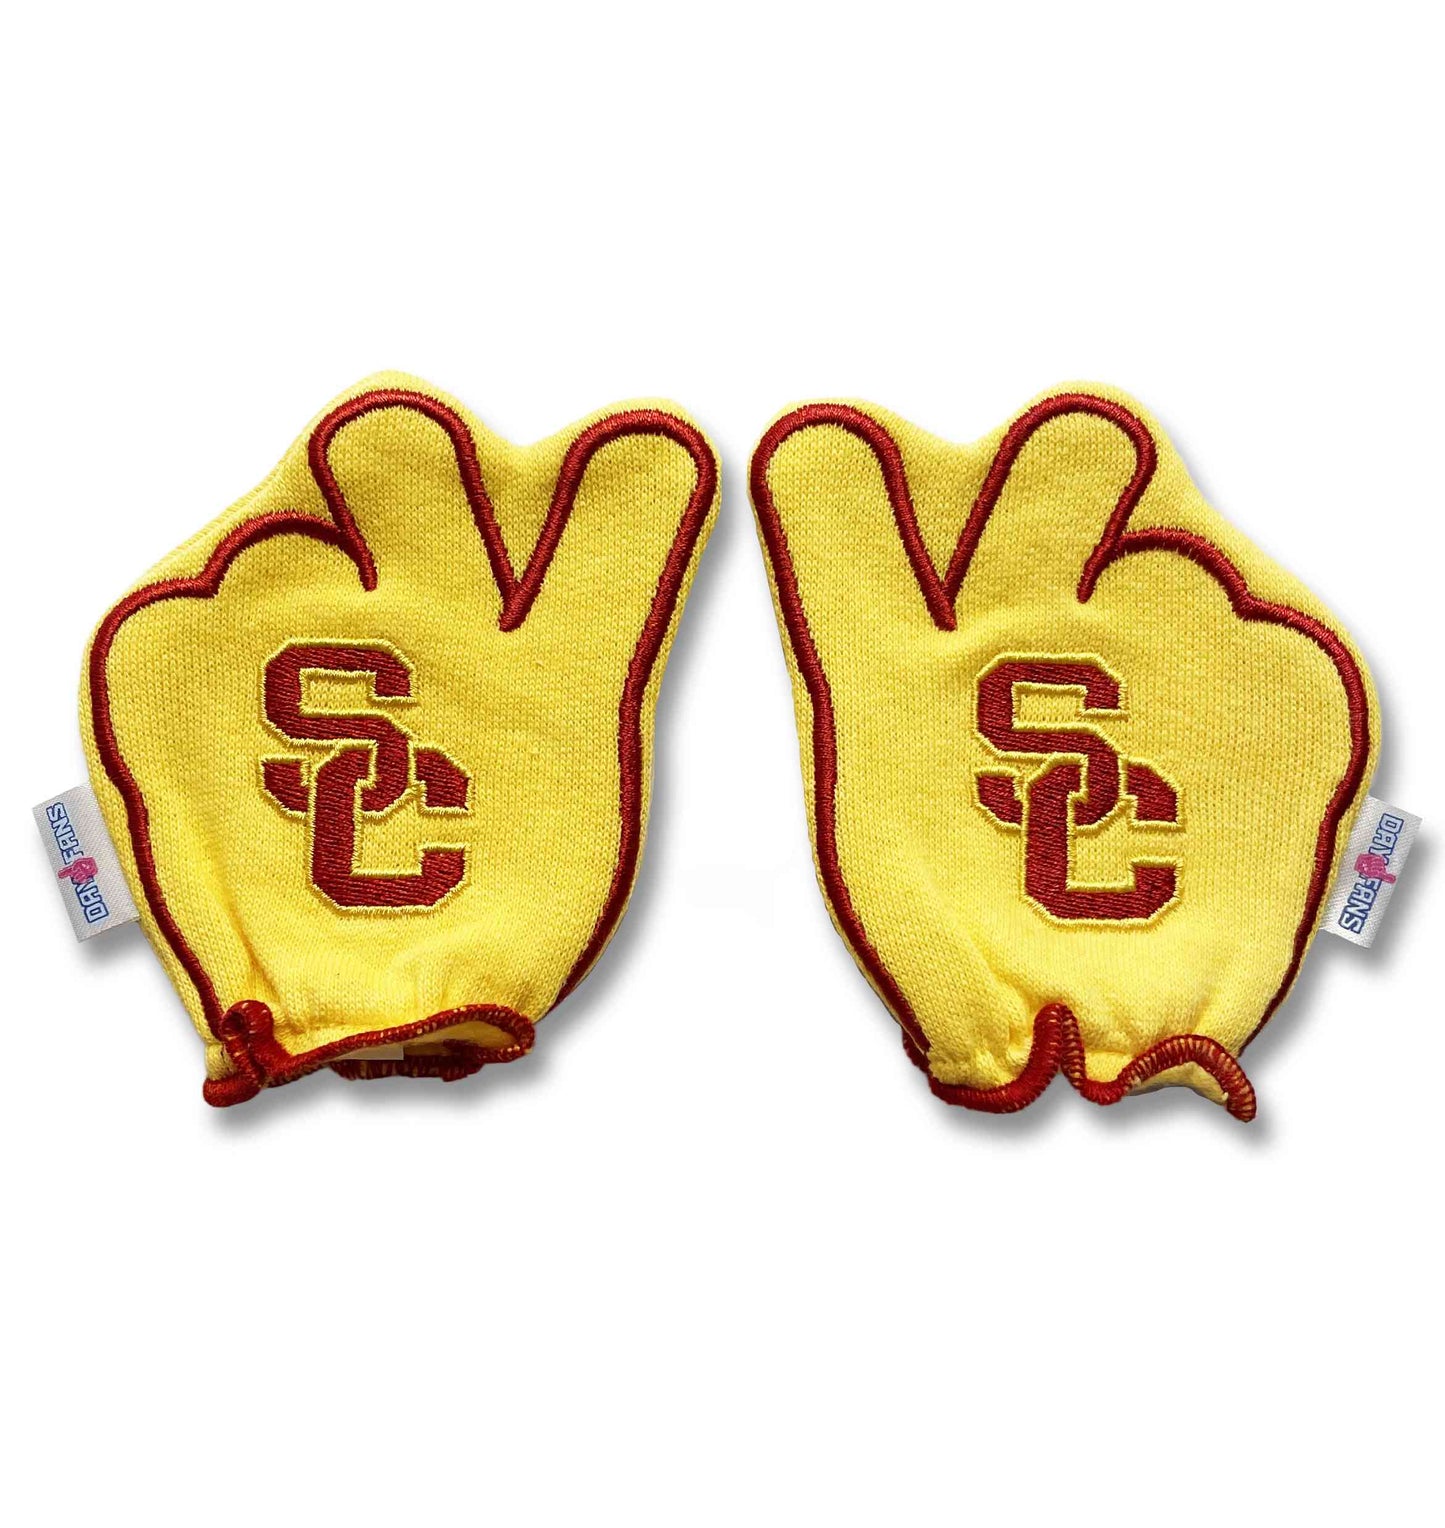 USC Fight On FanMitts Baby Mittens Gold Back Pair